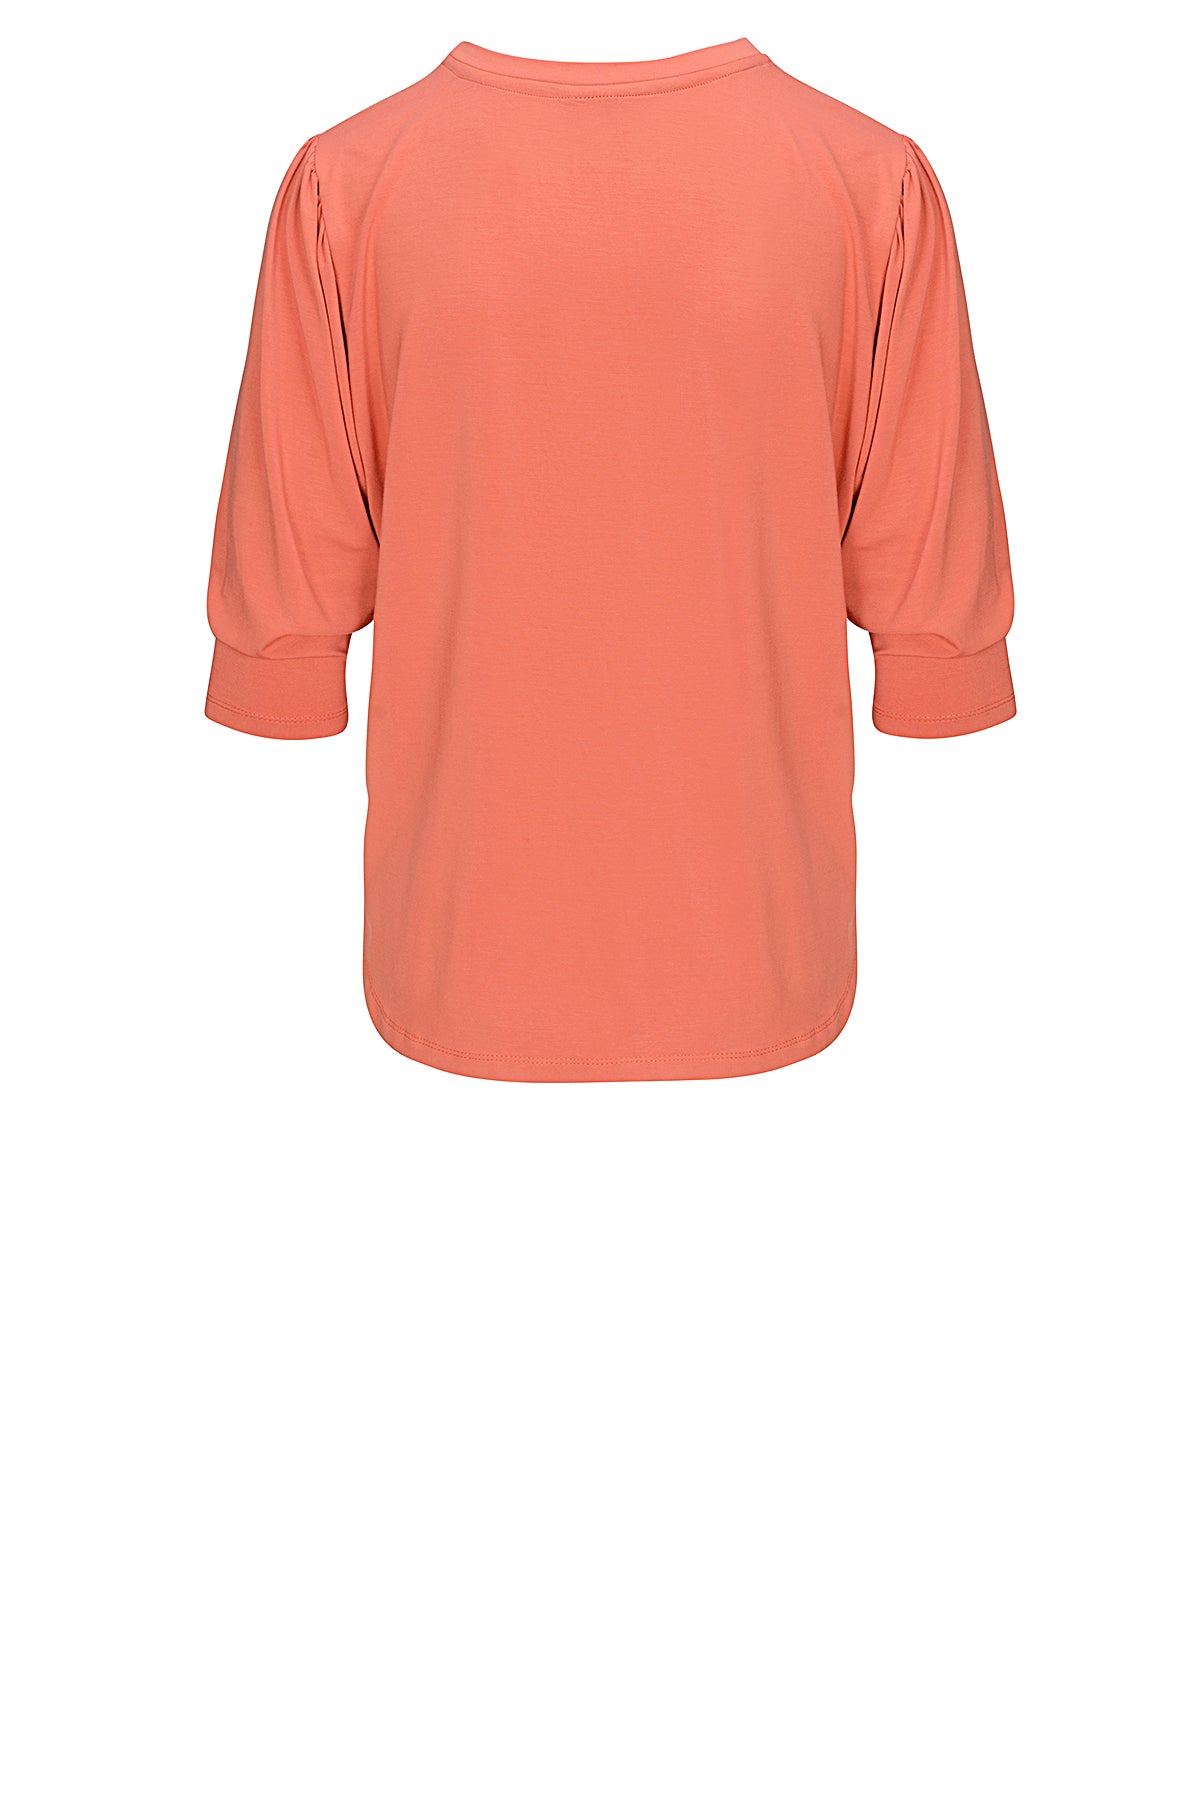 LUXZUZ // ONE TWO Lailong Bamboo T-Shirt 216 Apricot Brandy